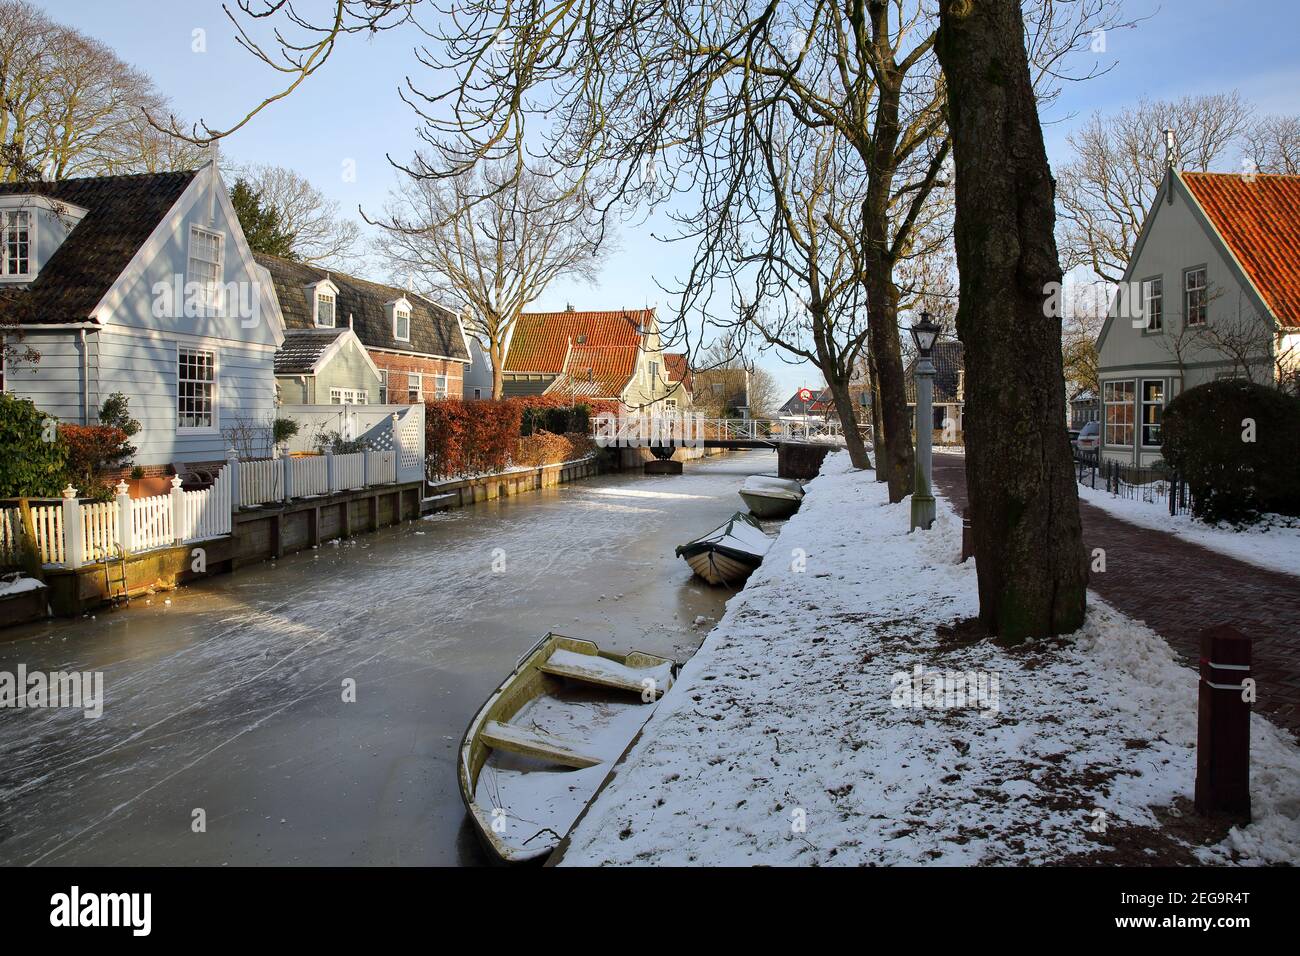 Winter snow and  frozen canals in Broek in Waterland, a small town with traditional old and painted wooden houses, North Holland, Netherlands. Stock Photo